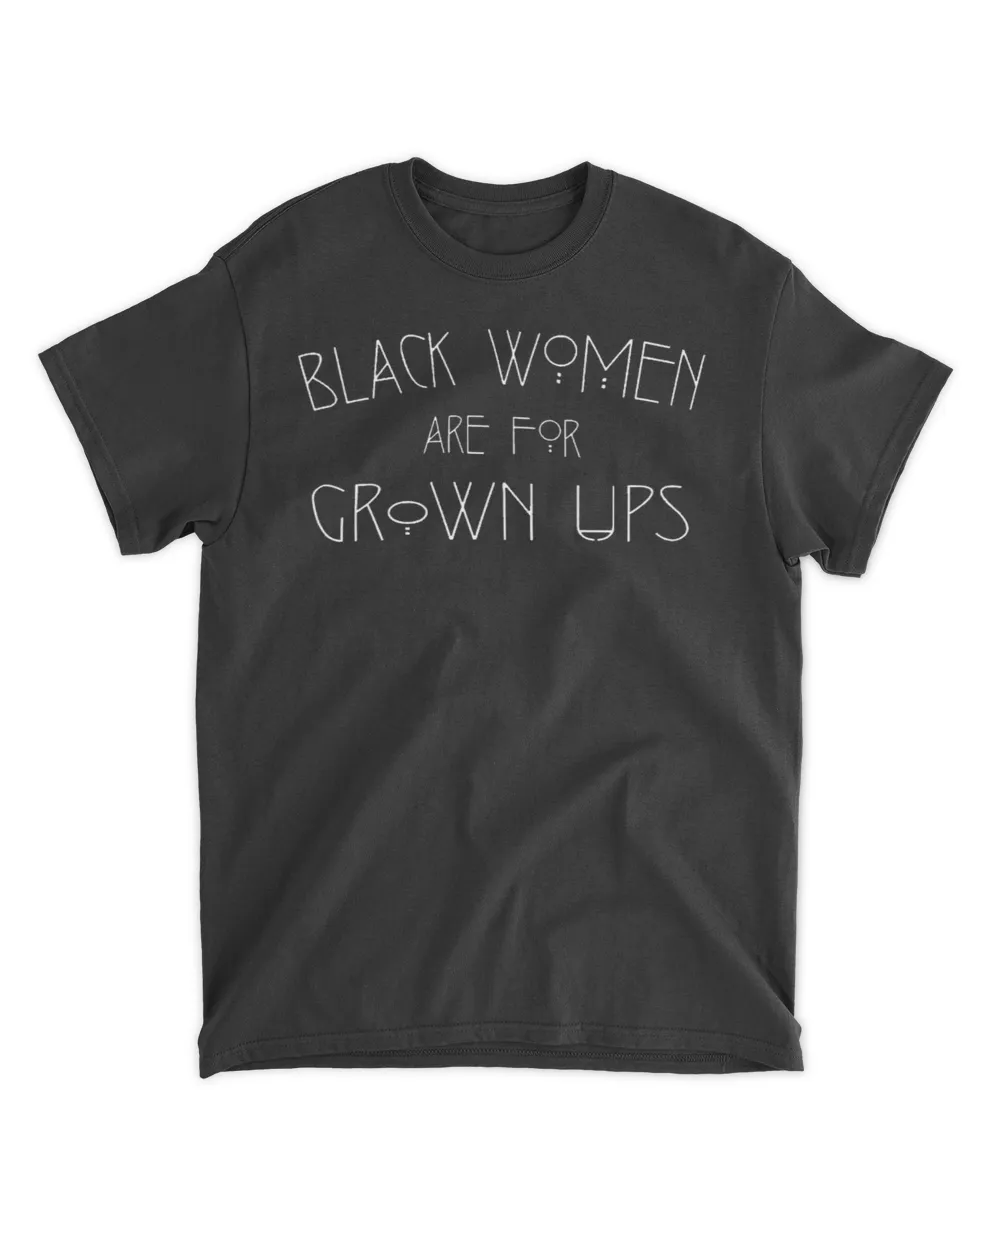  Black woman are for grown ups shirt